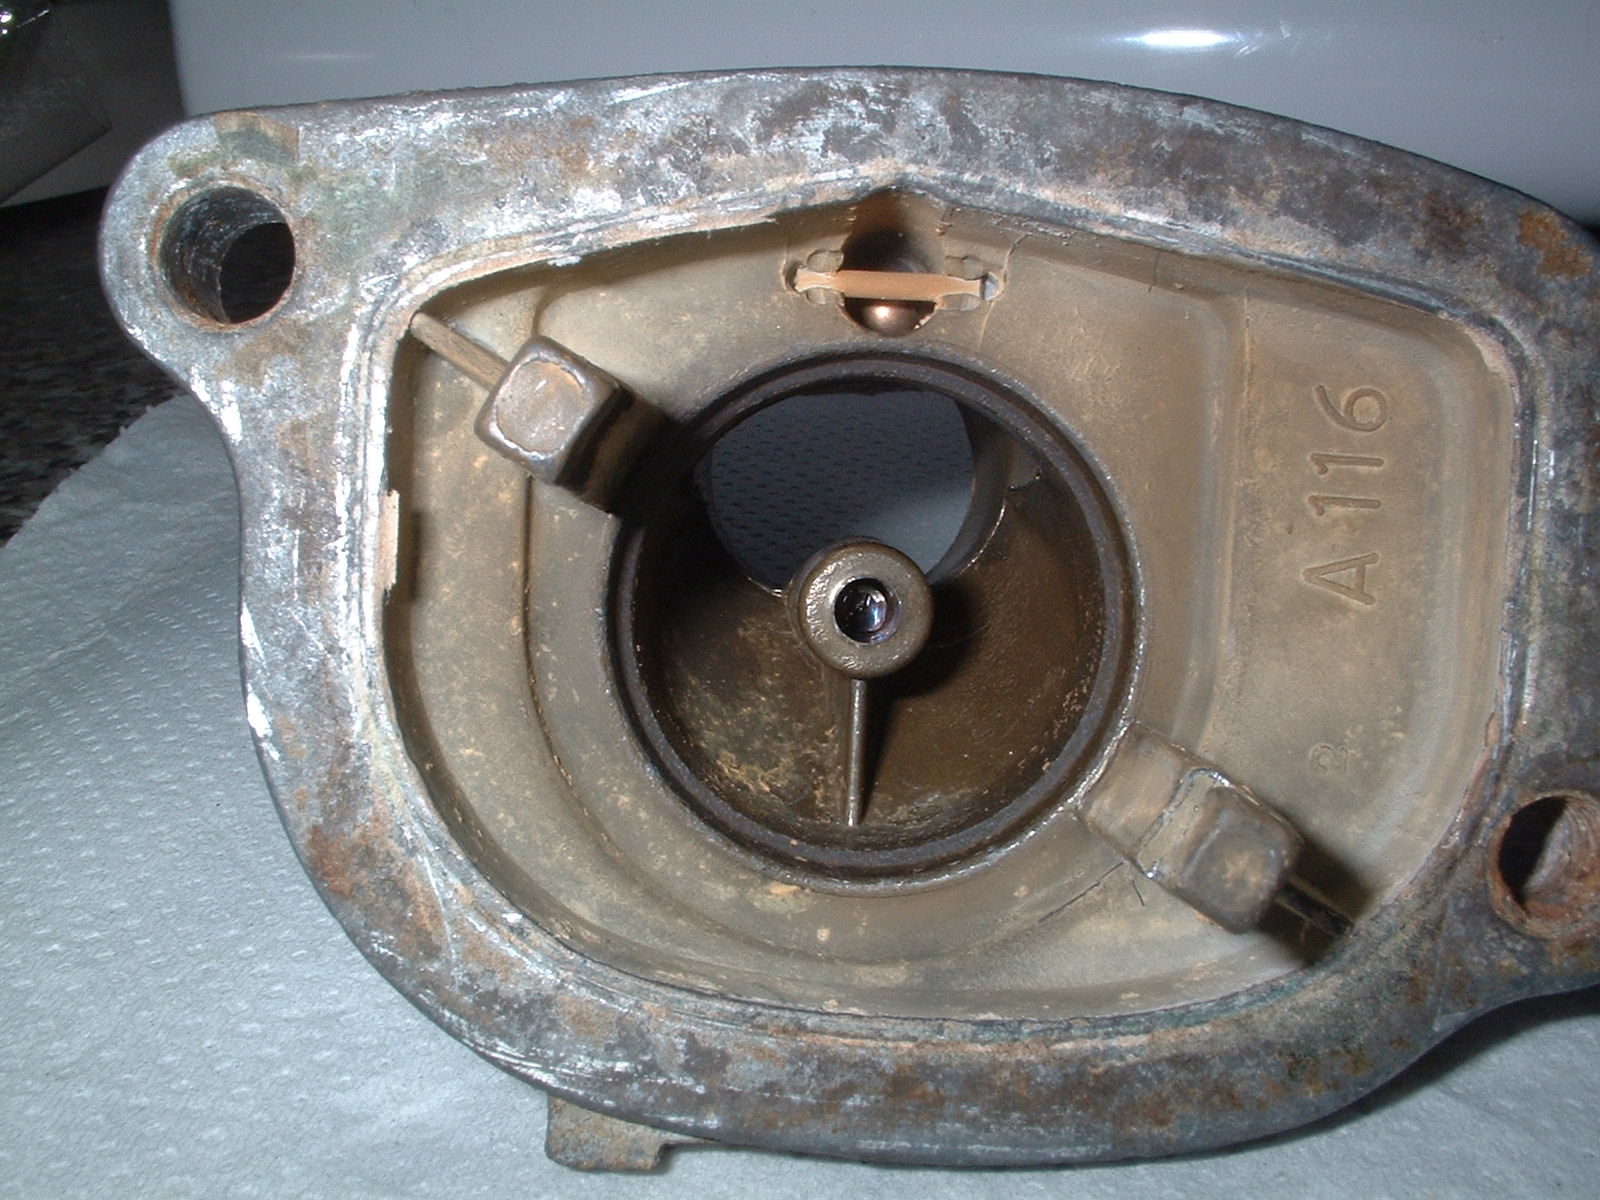 Stripped thermostat housing